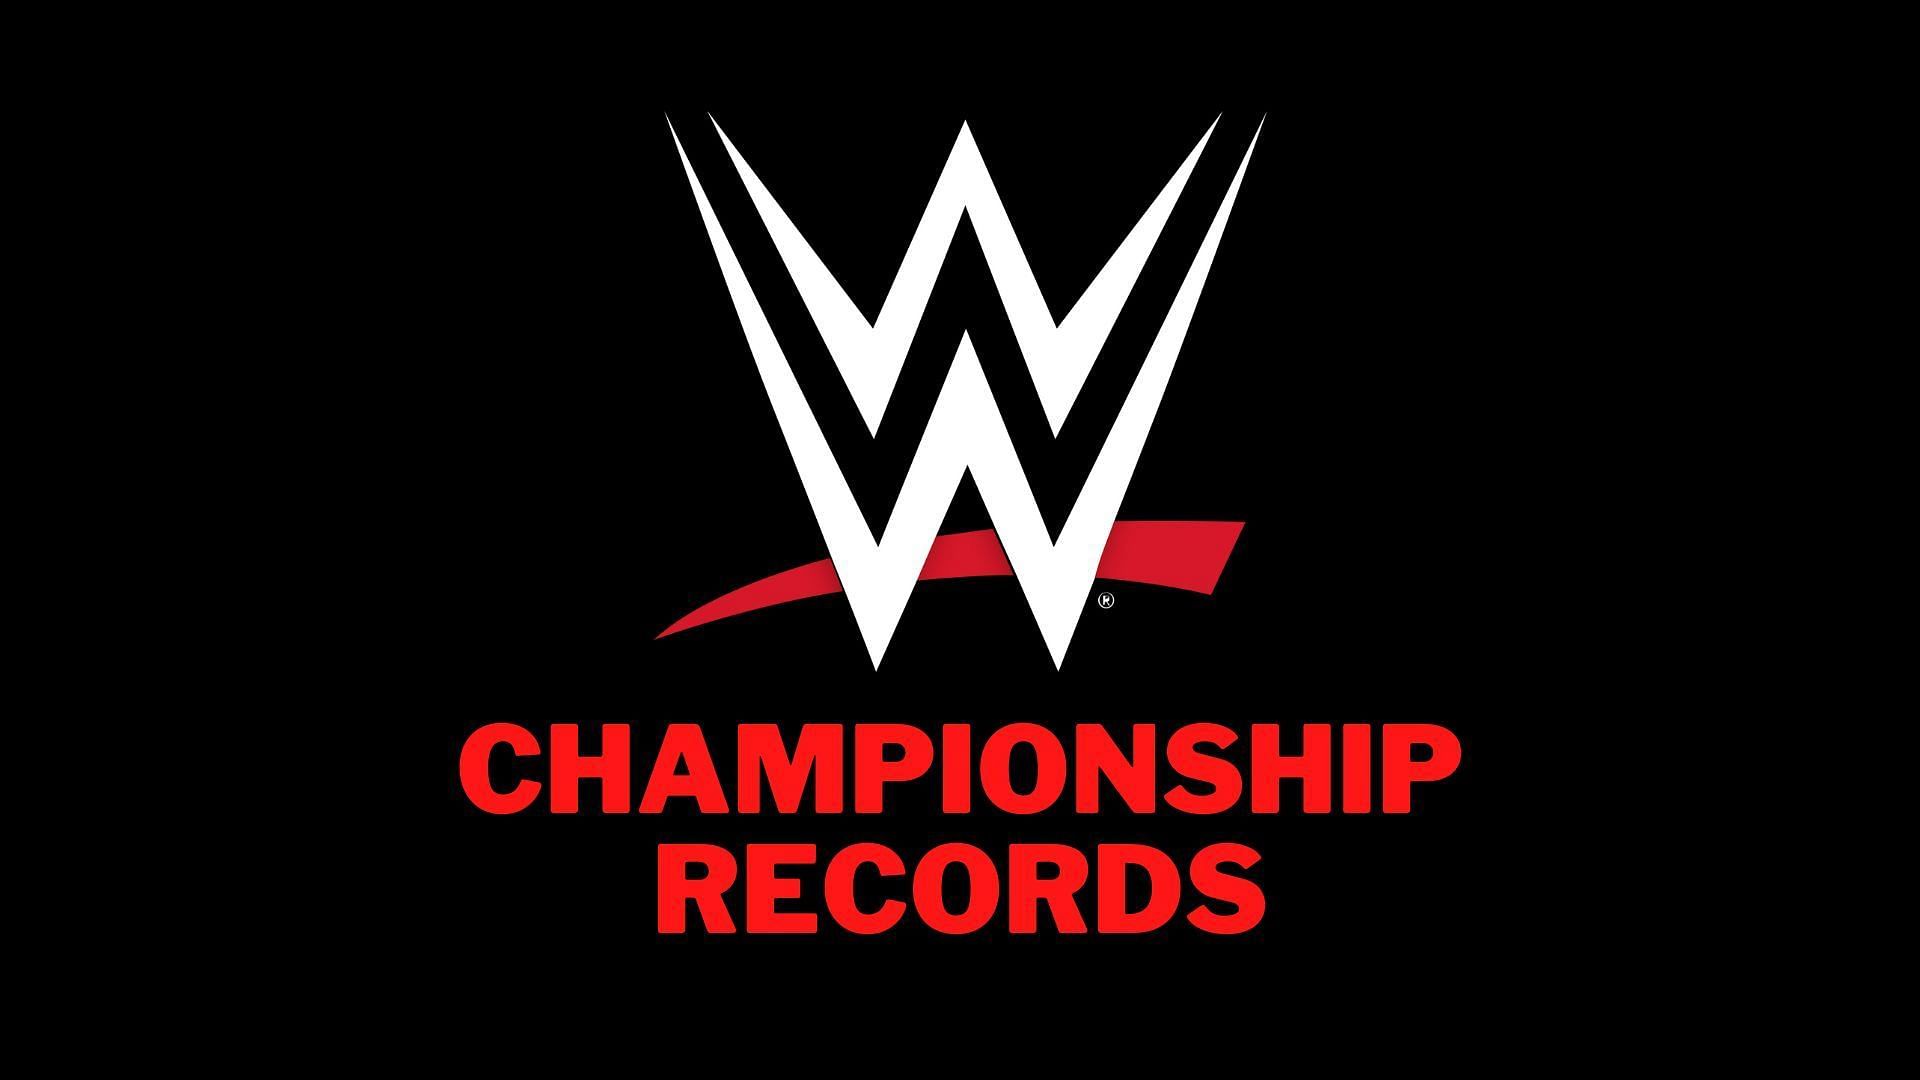 WWE has a total of 14 championships split across three brands